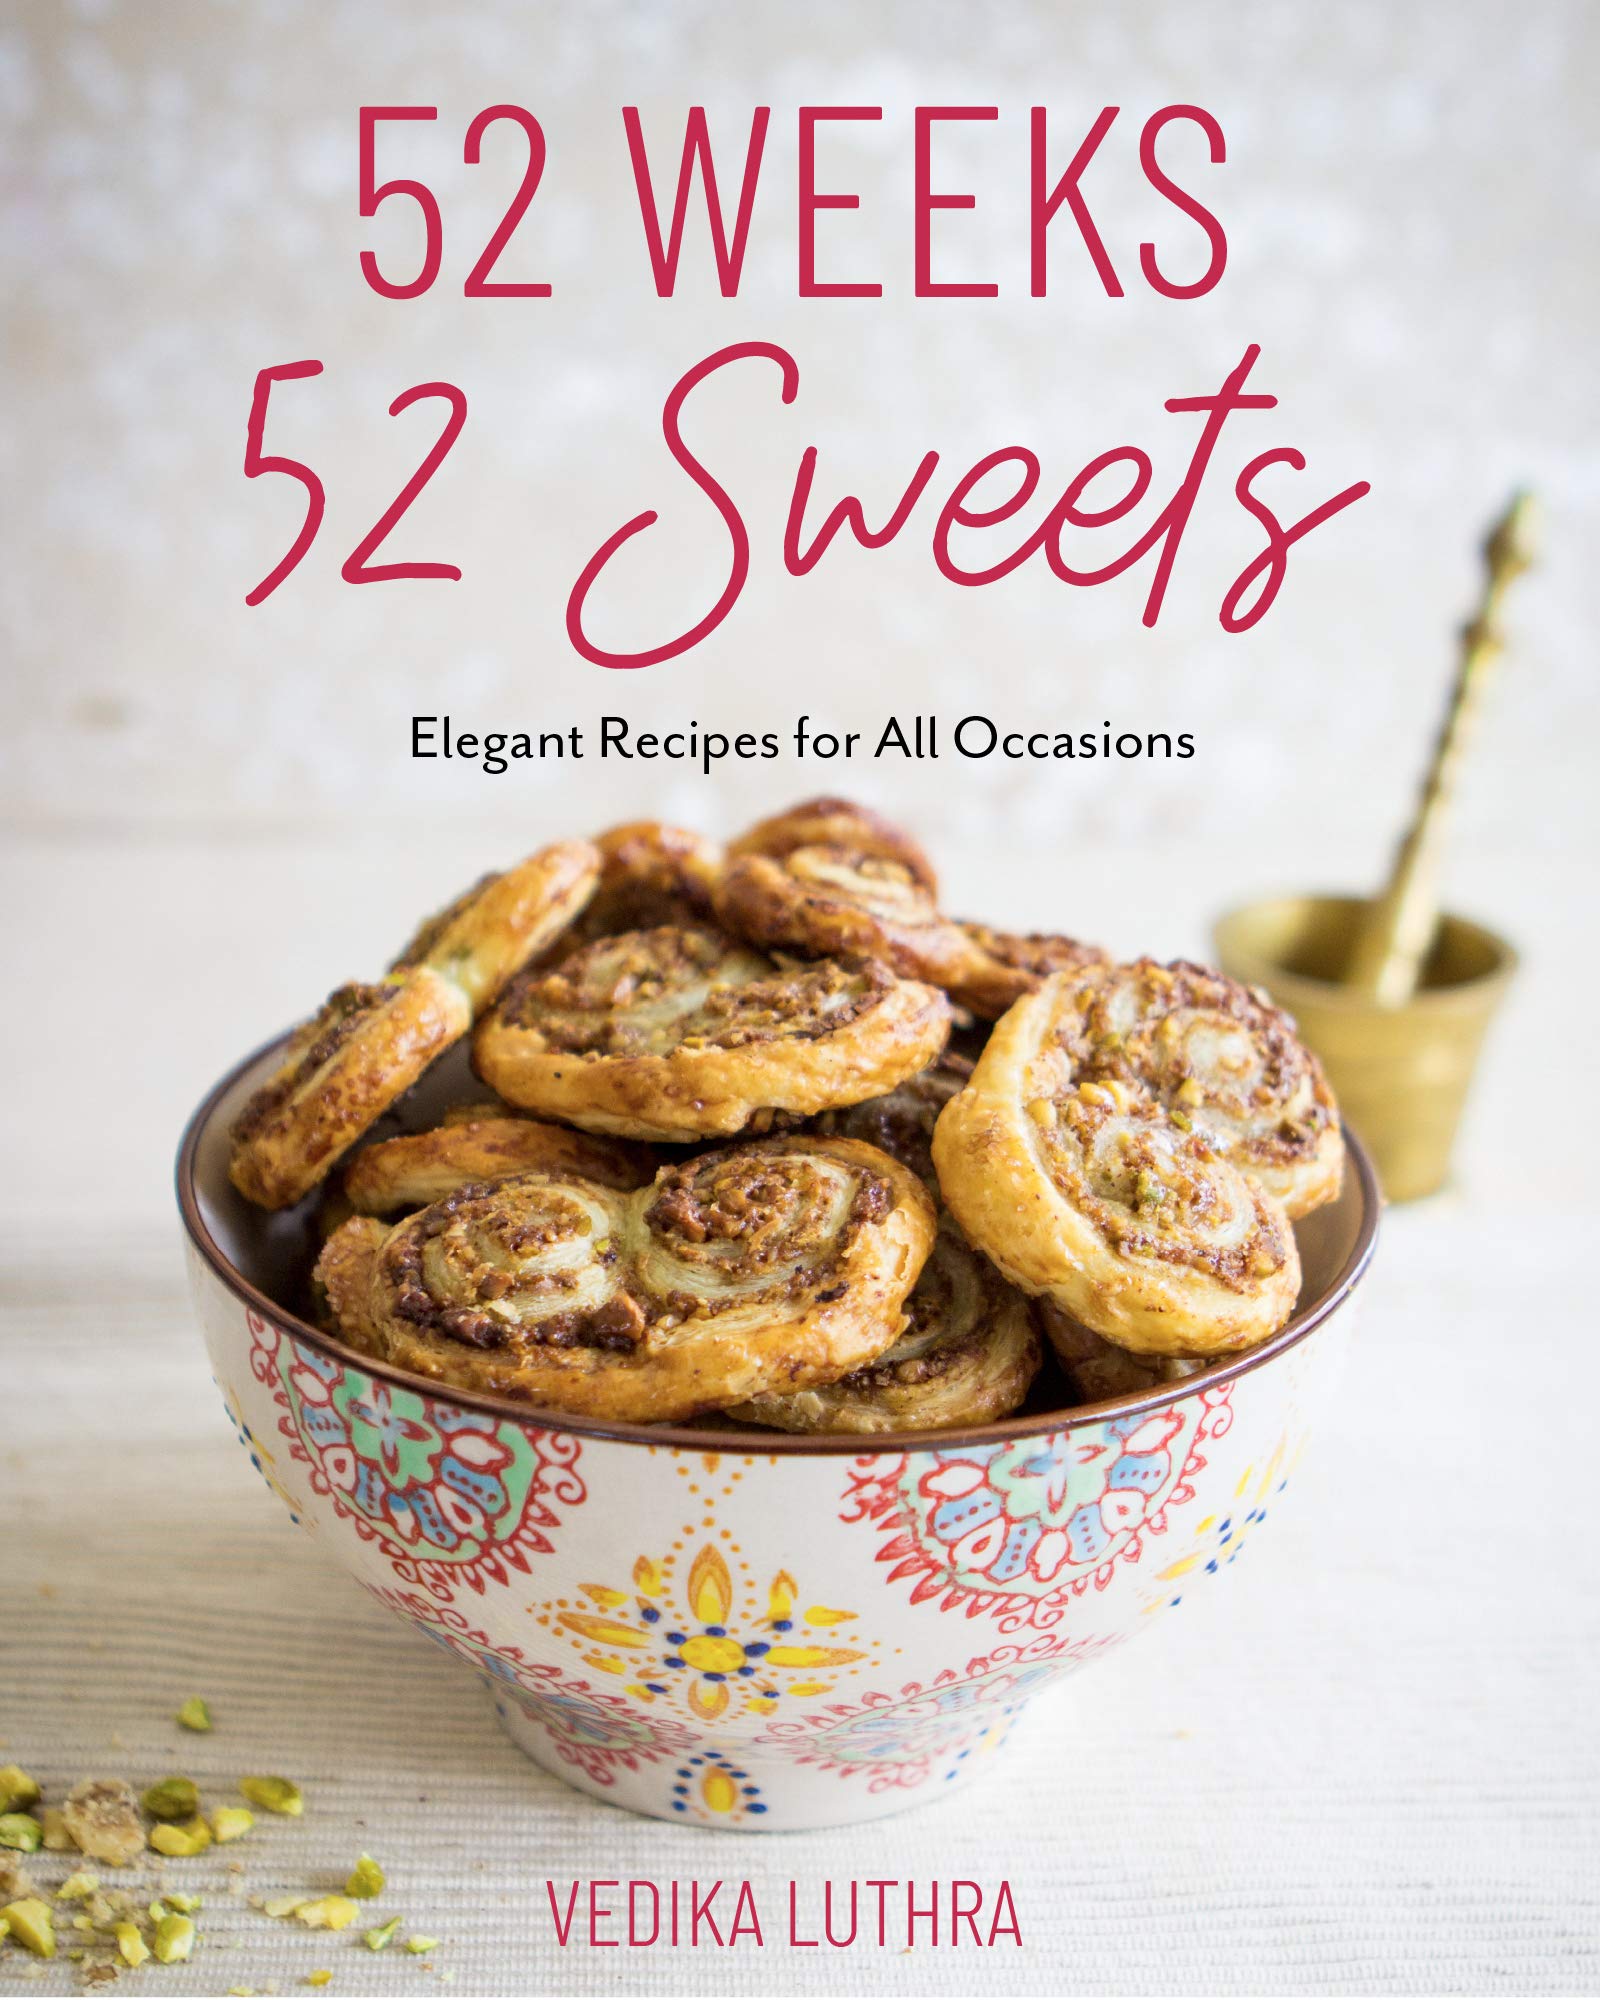 Cover of 52 Weeks 52 Sweets by Vedika Luthra